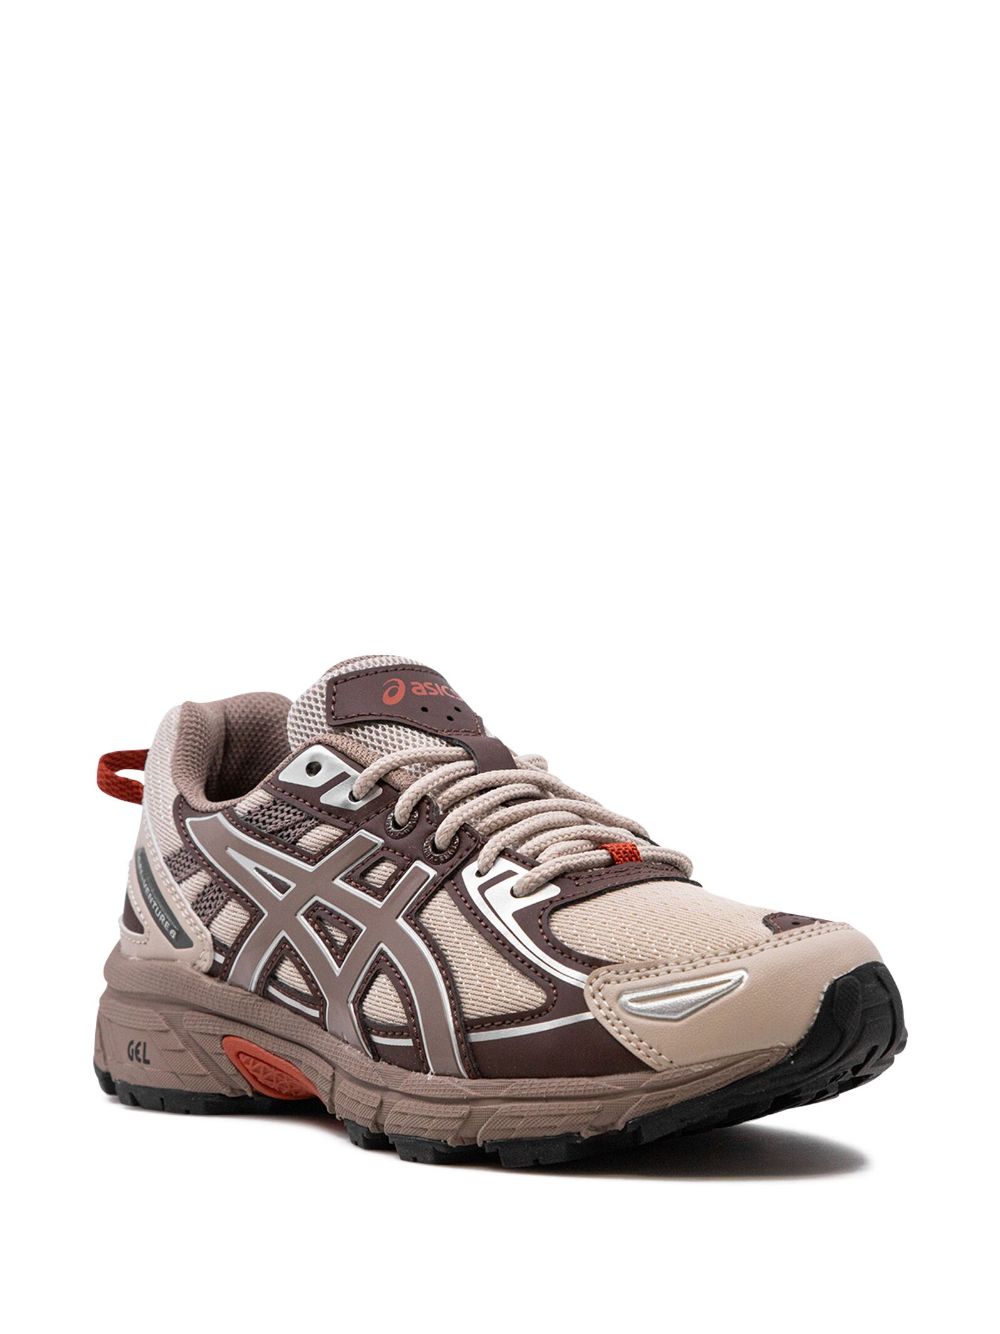 ASICS Gel-Venture 6 Simply Taupe/Taupe Gray sneakers - Beige